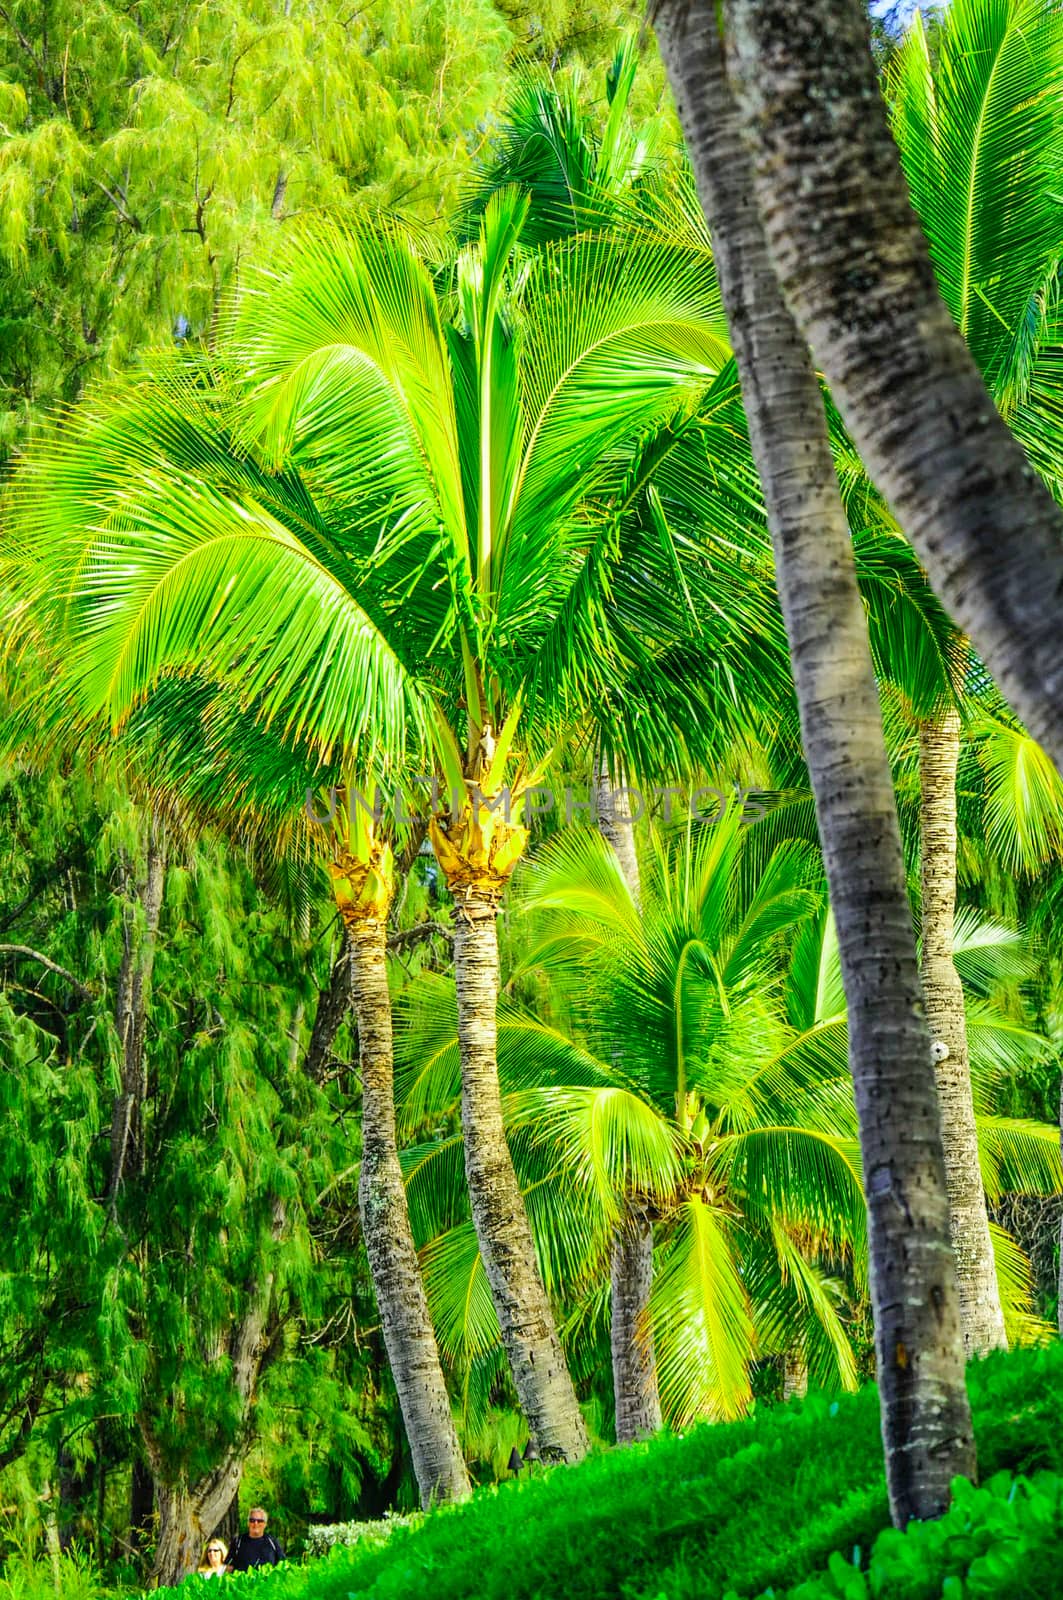 Tree scene in Maui fo Palms and other vegetation by cestes001